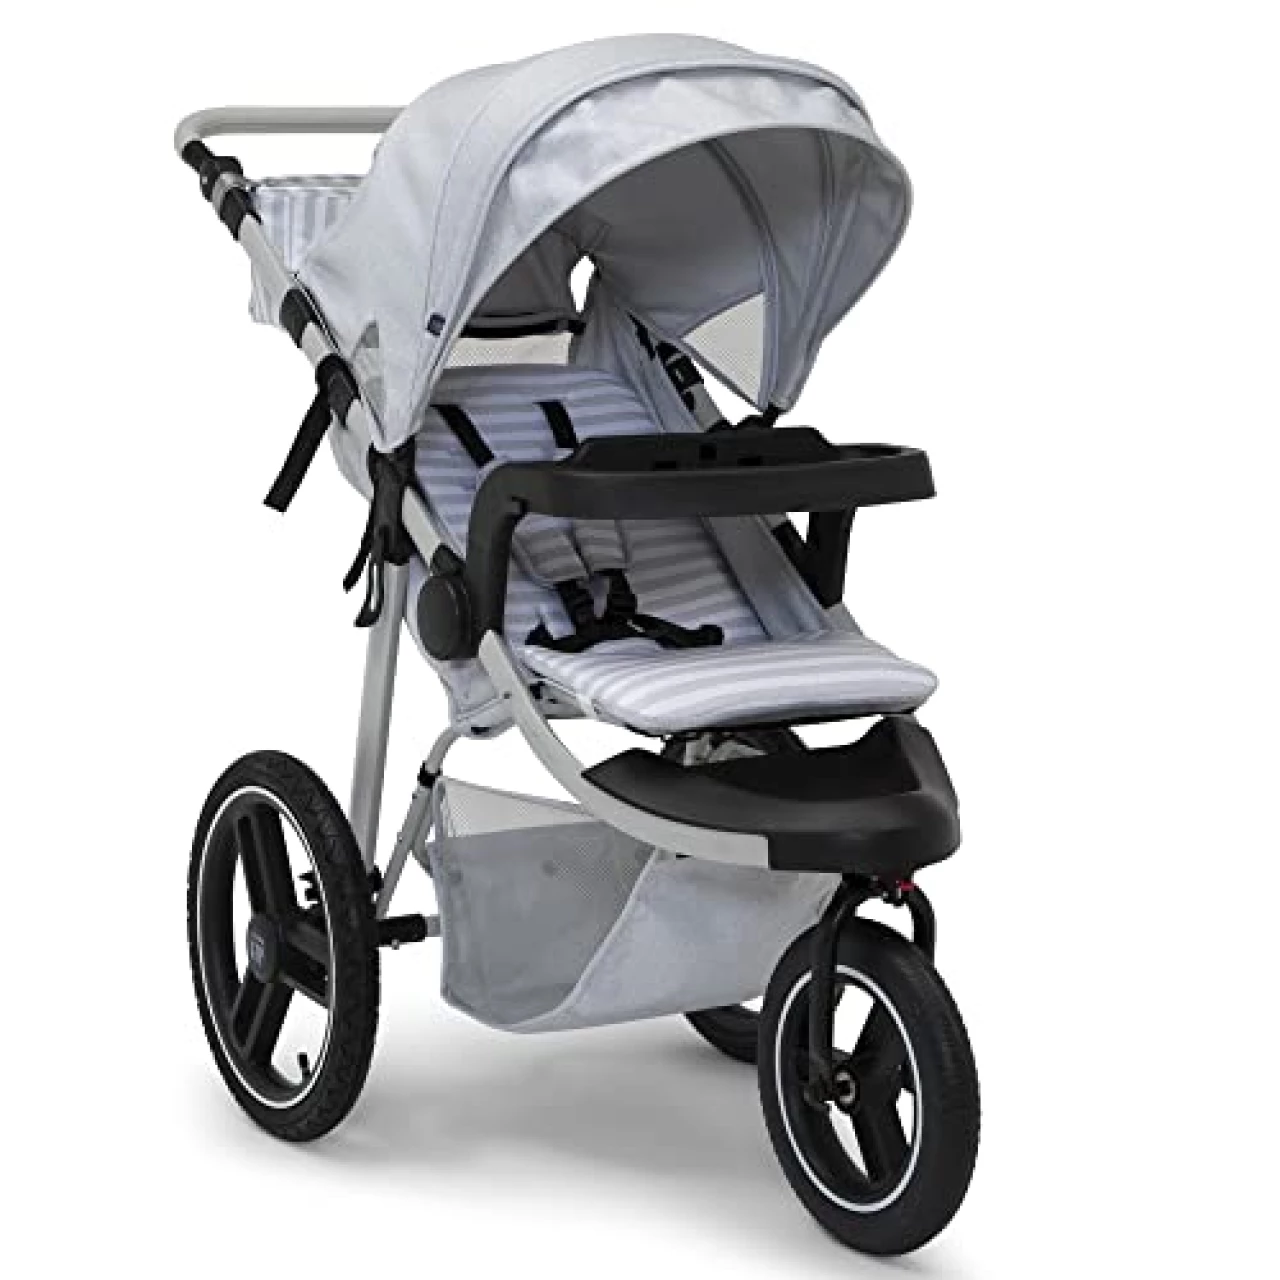 babyGap Trek Jogging Stroller - Lightweight Jogging Stoller with Extendable Canopy &amp; Reclining Seat - Includes Car Seat Adapter - Made with Sustainable Materials, Grey Stripes